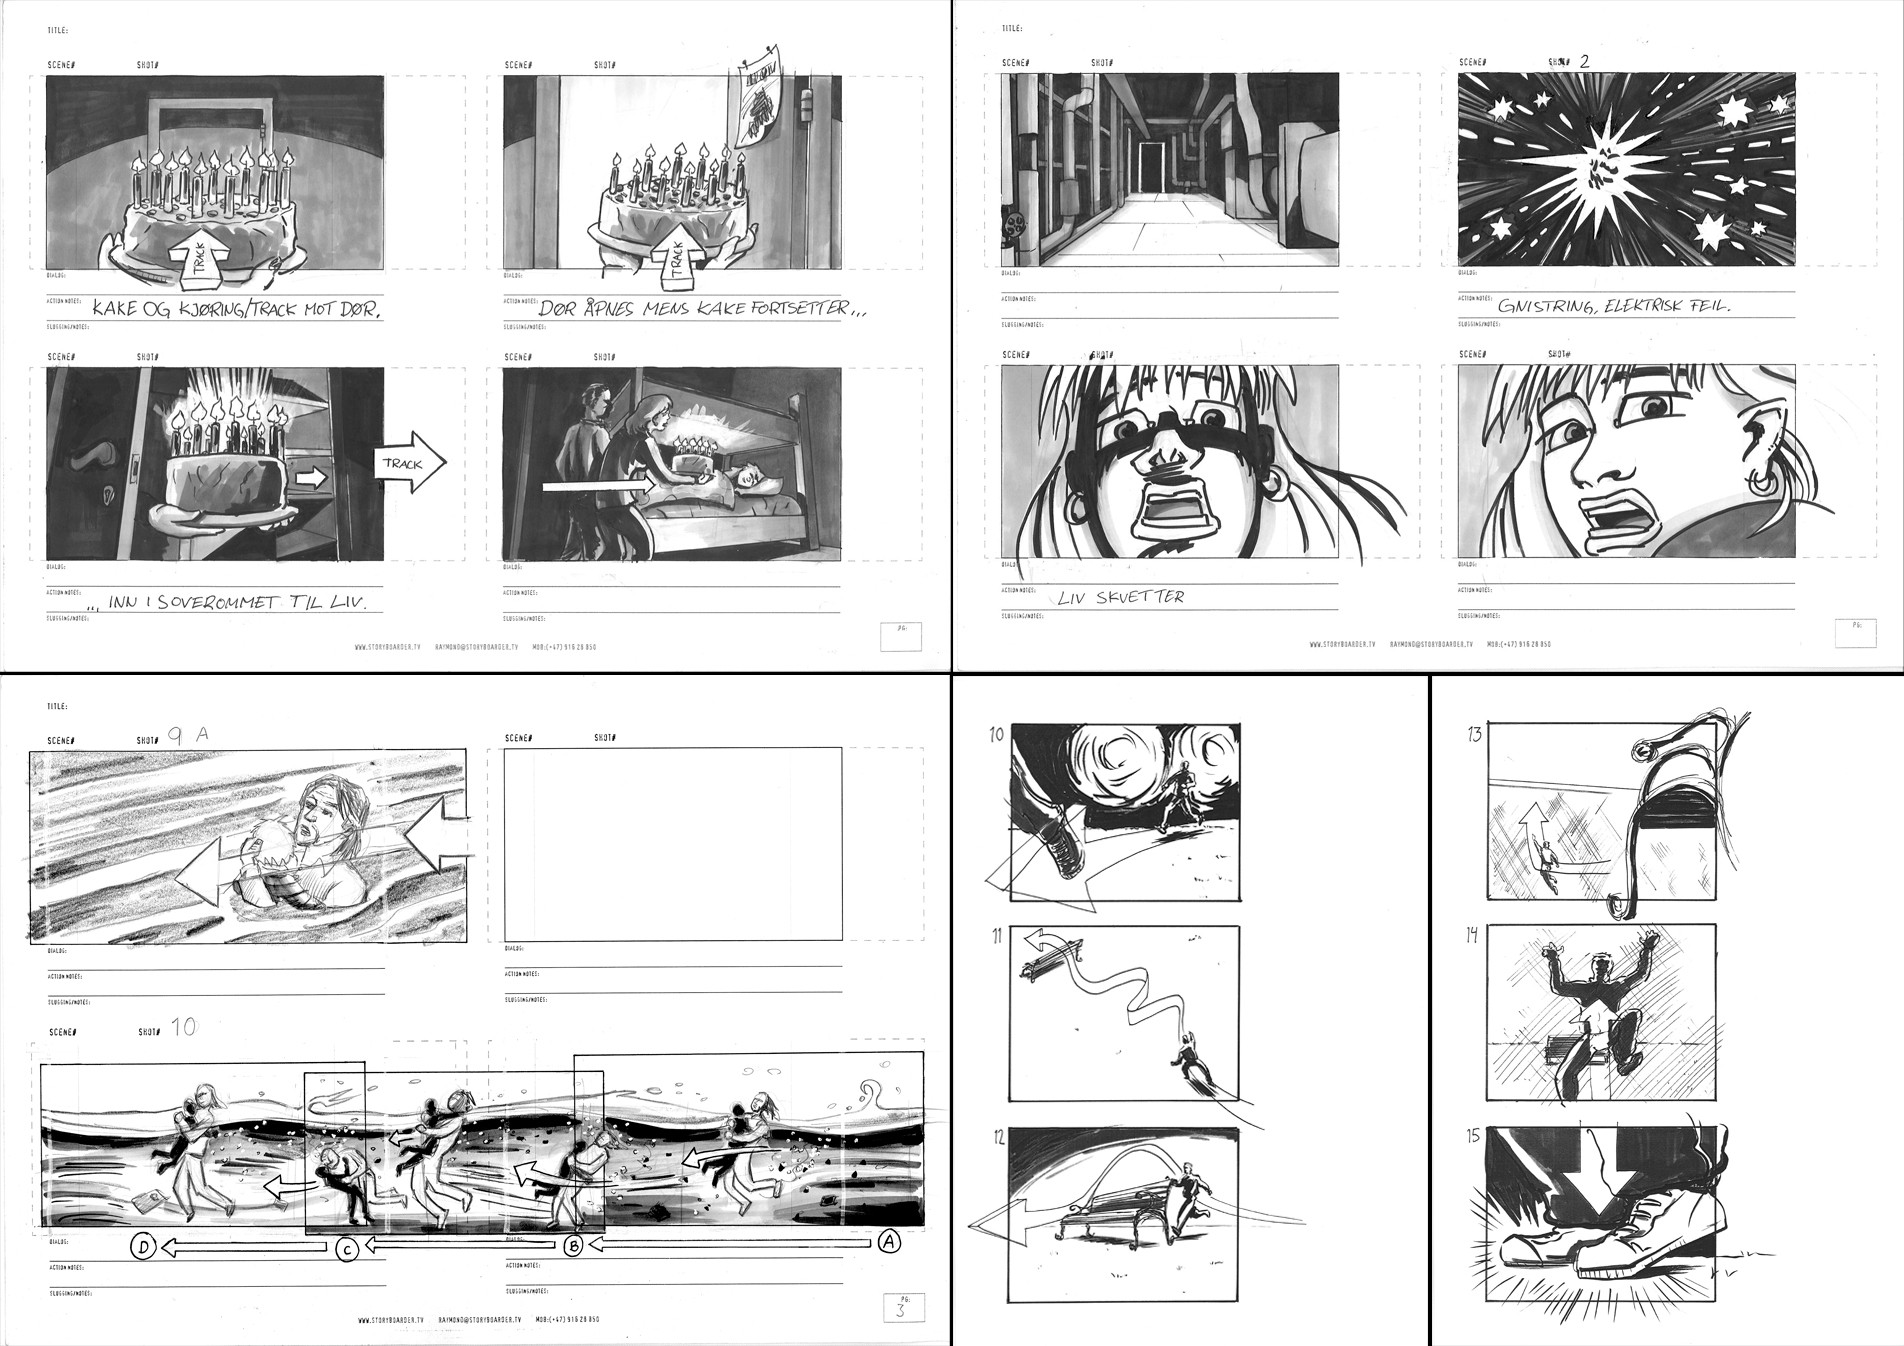 Various storyboards from comercials and motion pictures(De usynlige and Titanics ti liv)